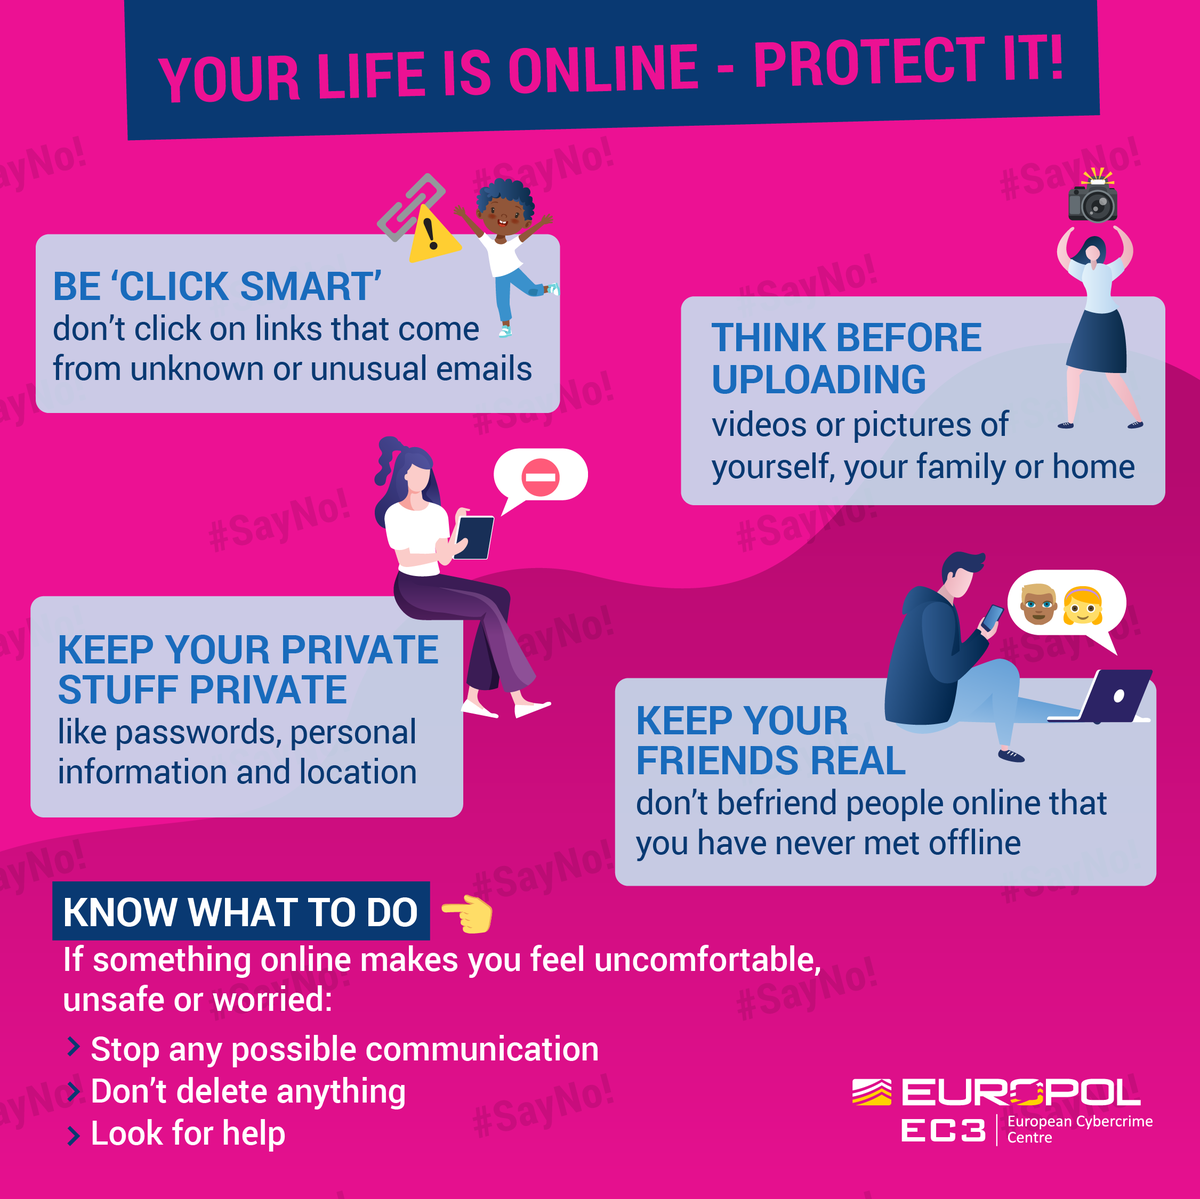 Your life is online and it’s worth protecting. If something makes you feel uncomfortable, unsafe or worried:Stop all communicationDon’t delete anythingLook for help from a parent, friend, teacher or someone you trust #CoronaCrimes